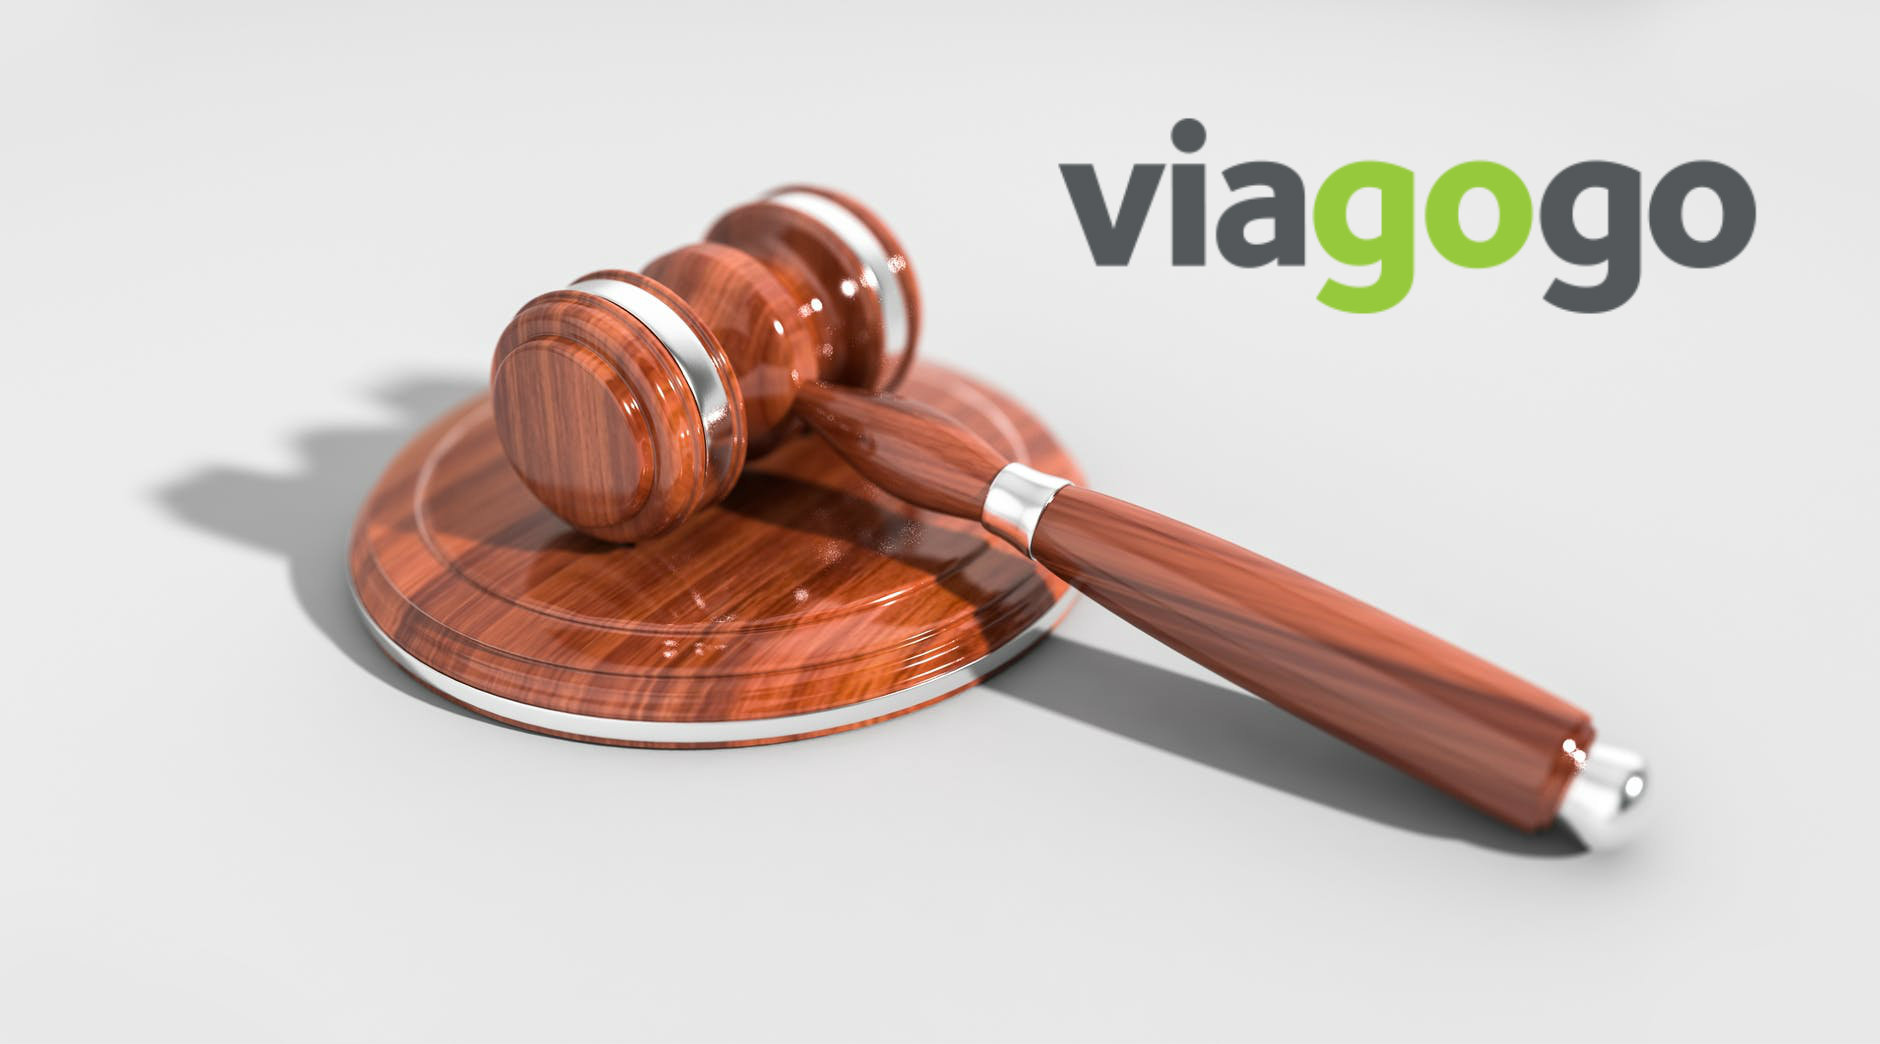 Court orders Viagogo to clean up business practises in UK